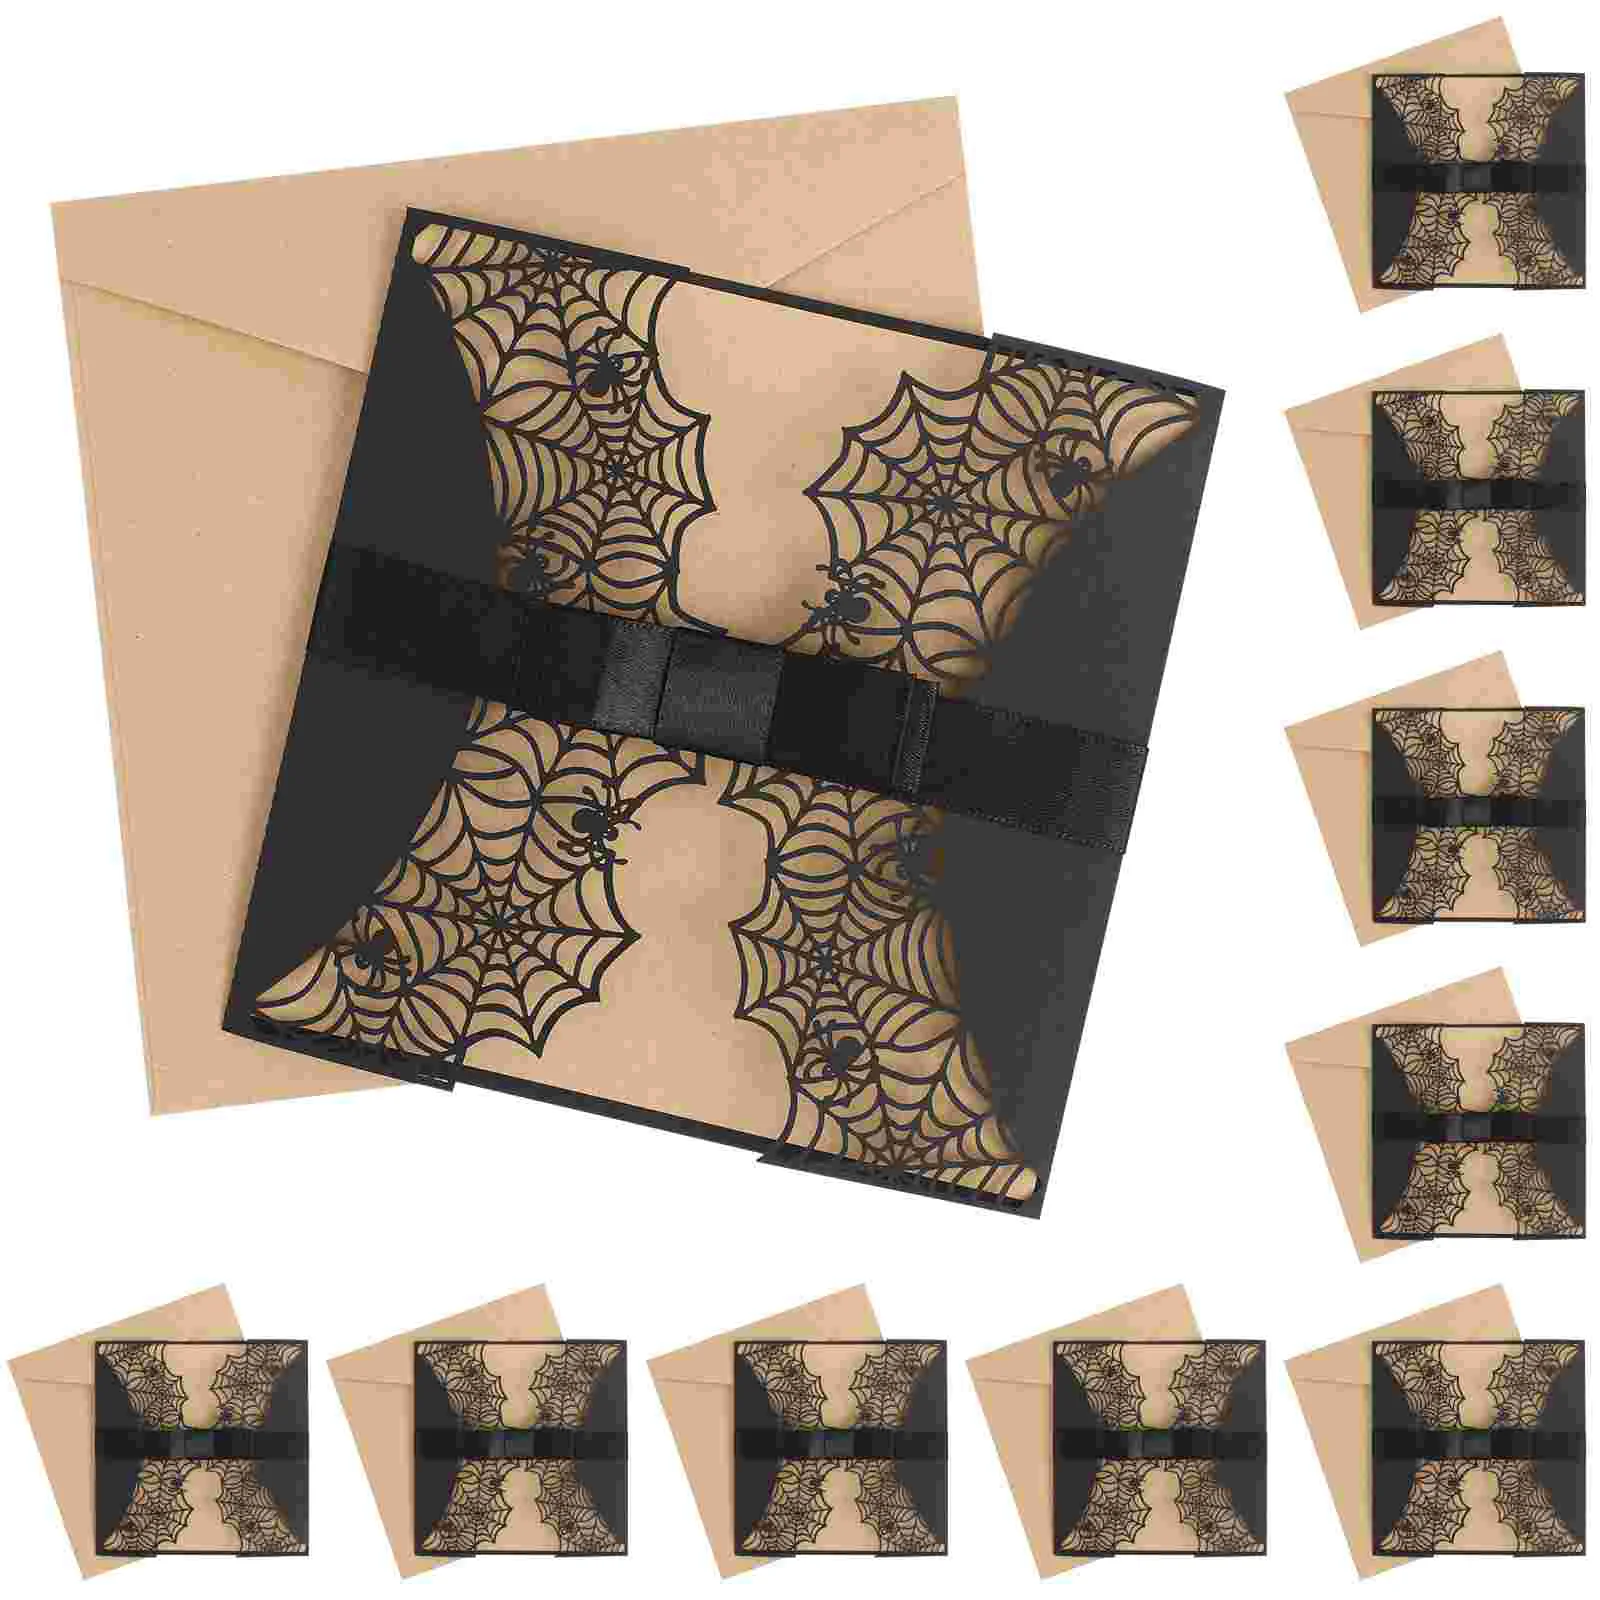 

10pcs Invitations Cards and Envelopes Party Spiderweb Design Cards Wedding announcement Black